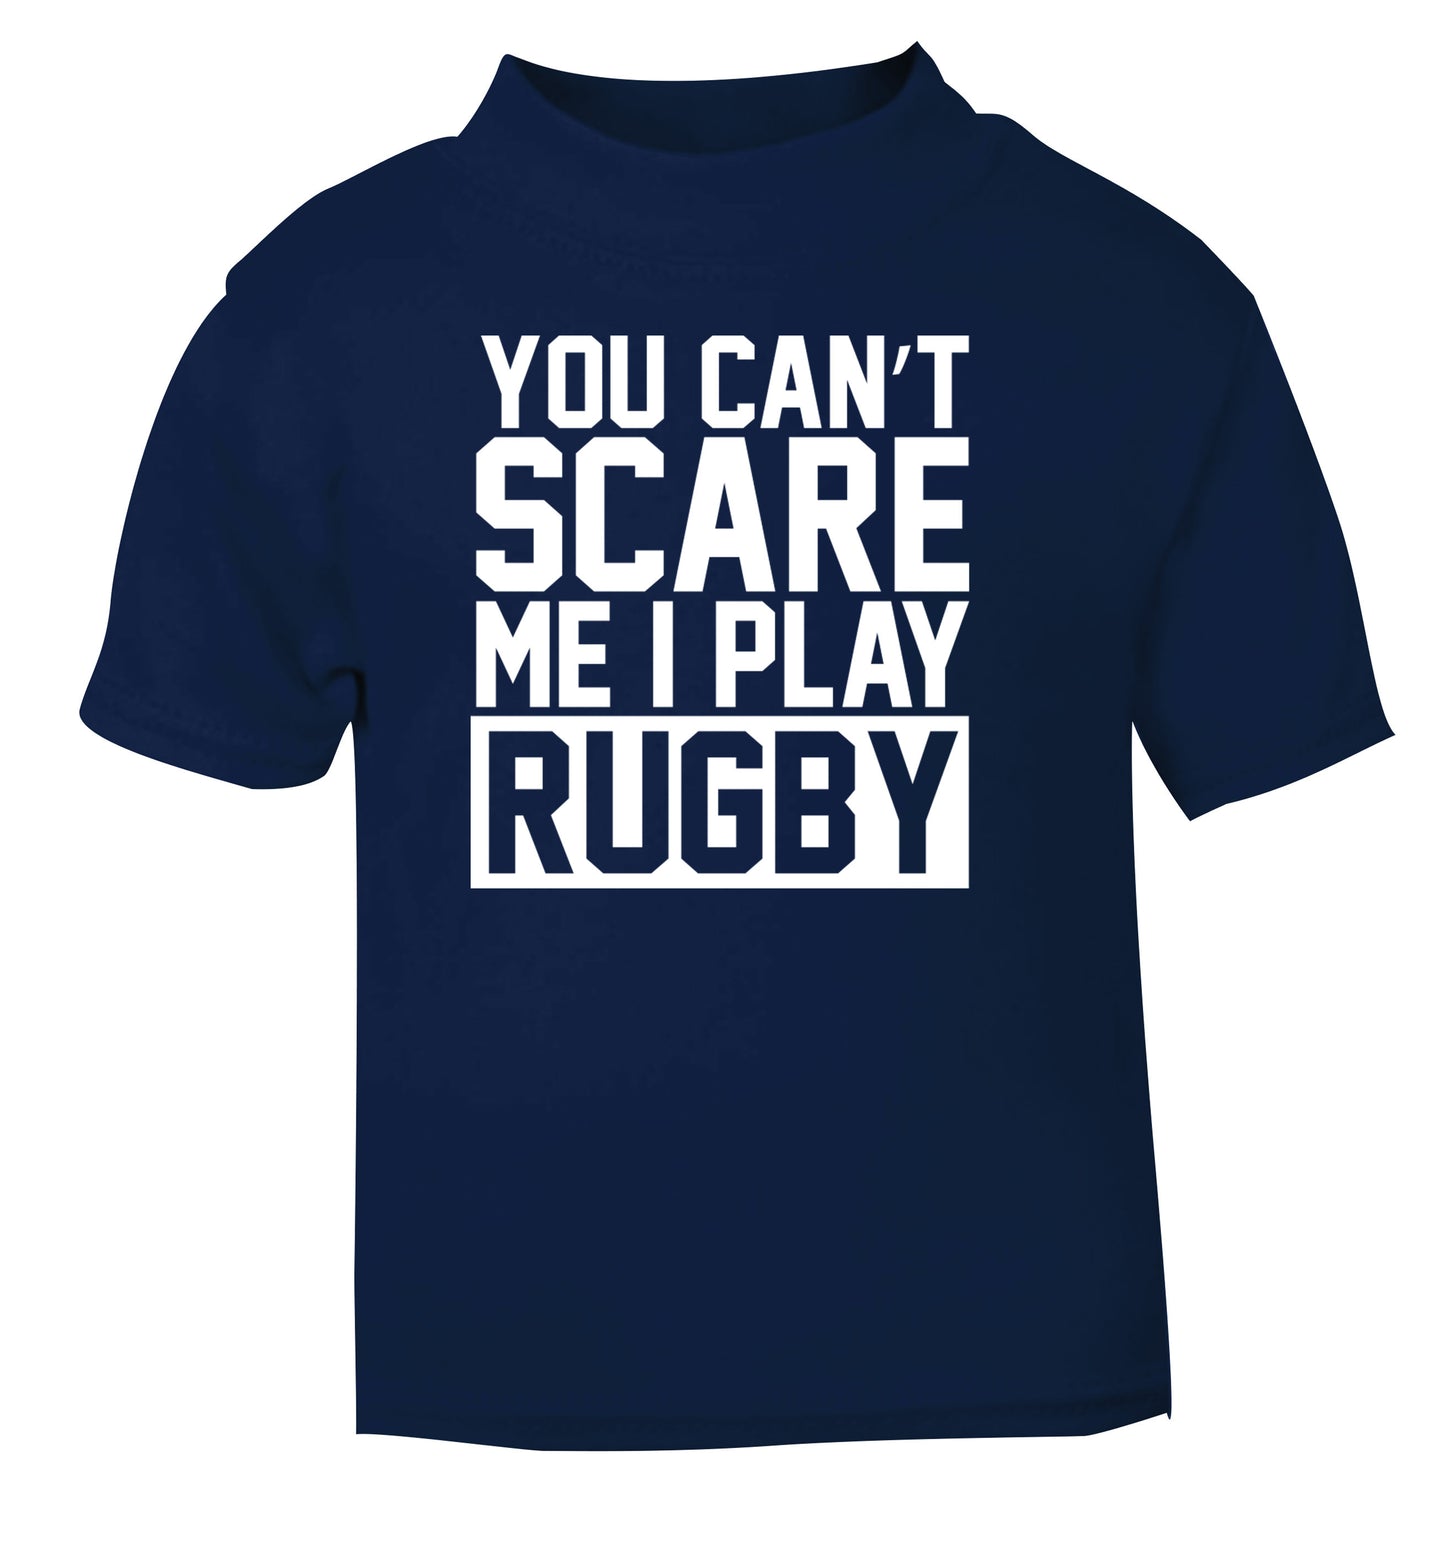 You can't scare me I play rugby navy Baby Toddler Tshirt 2 Years